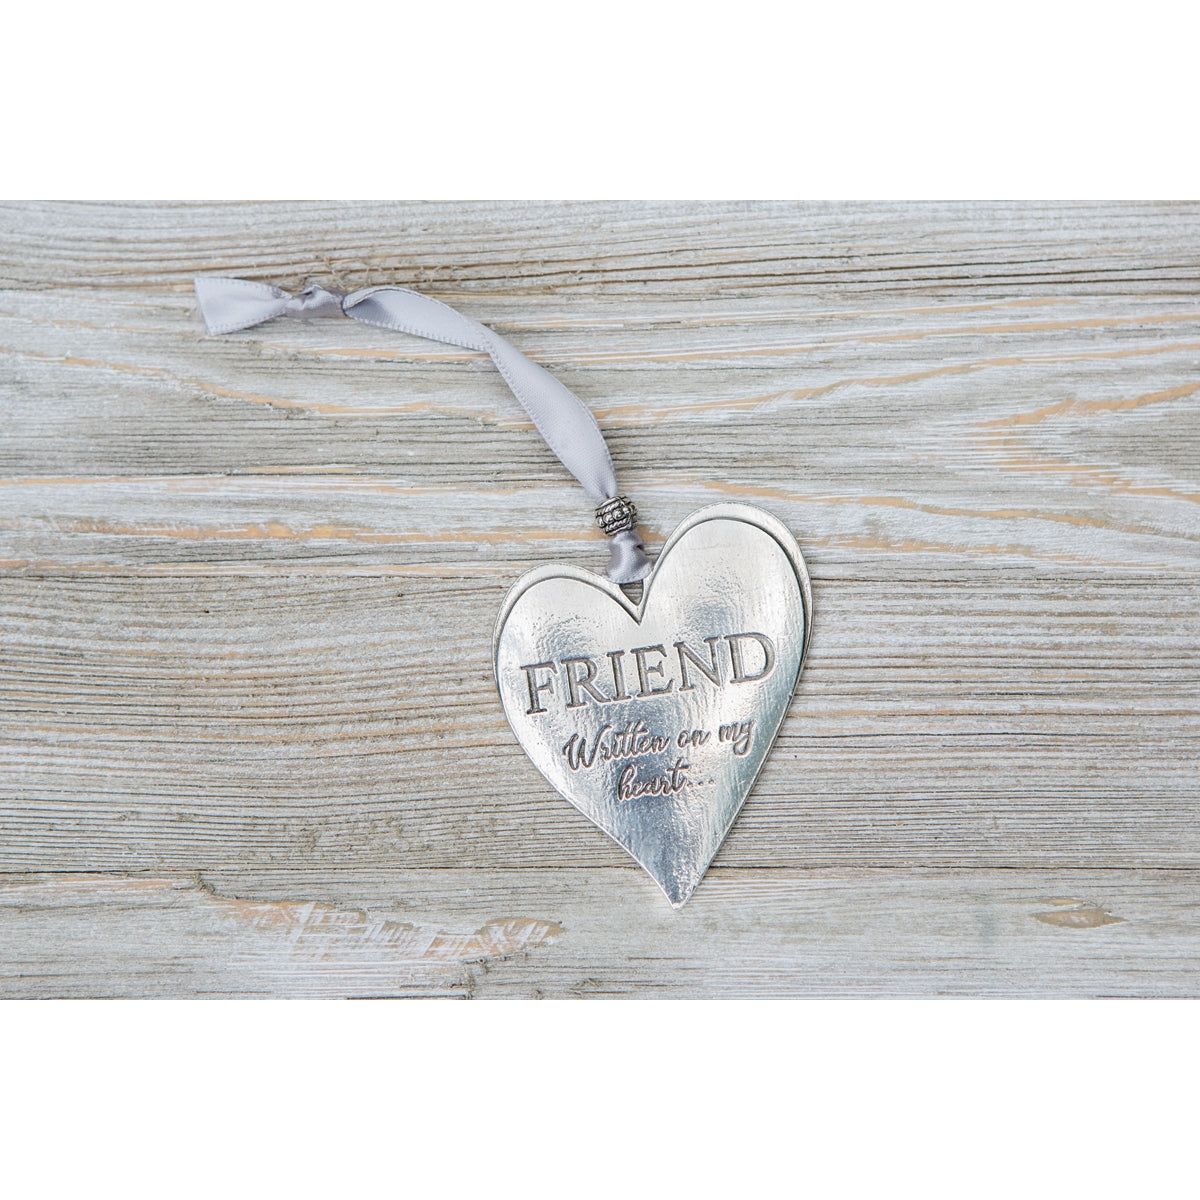 Cast pewter heart engraved with &quot;Friend Written on my heart&quot;.